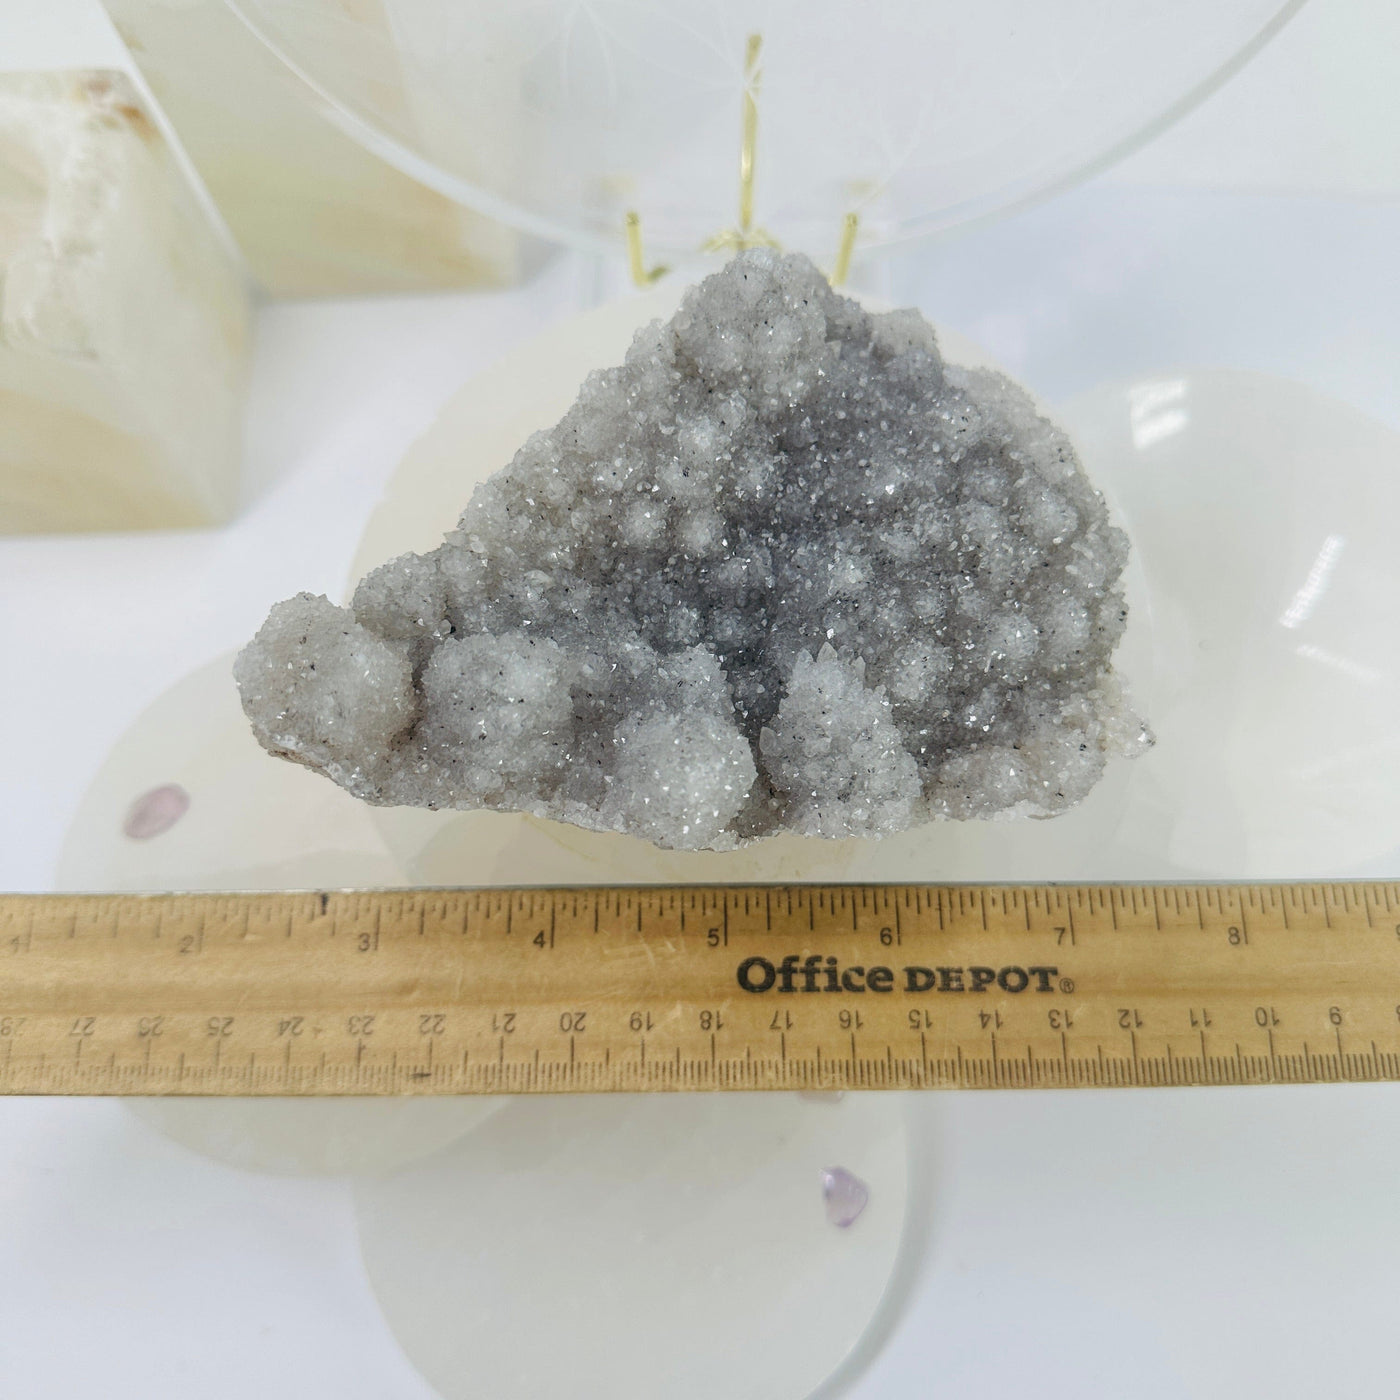 Raw Amethyst Cluster with Mica - light purple amethyst top view with ruler for size reference